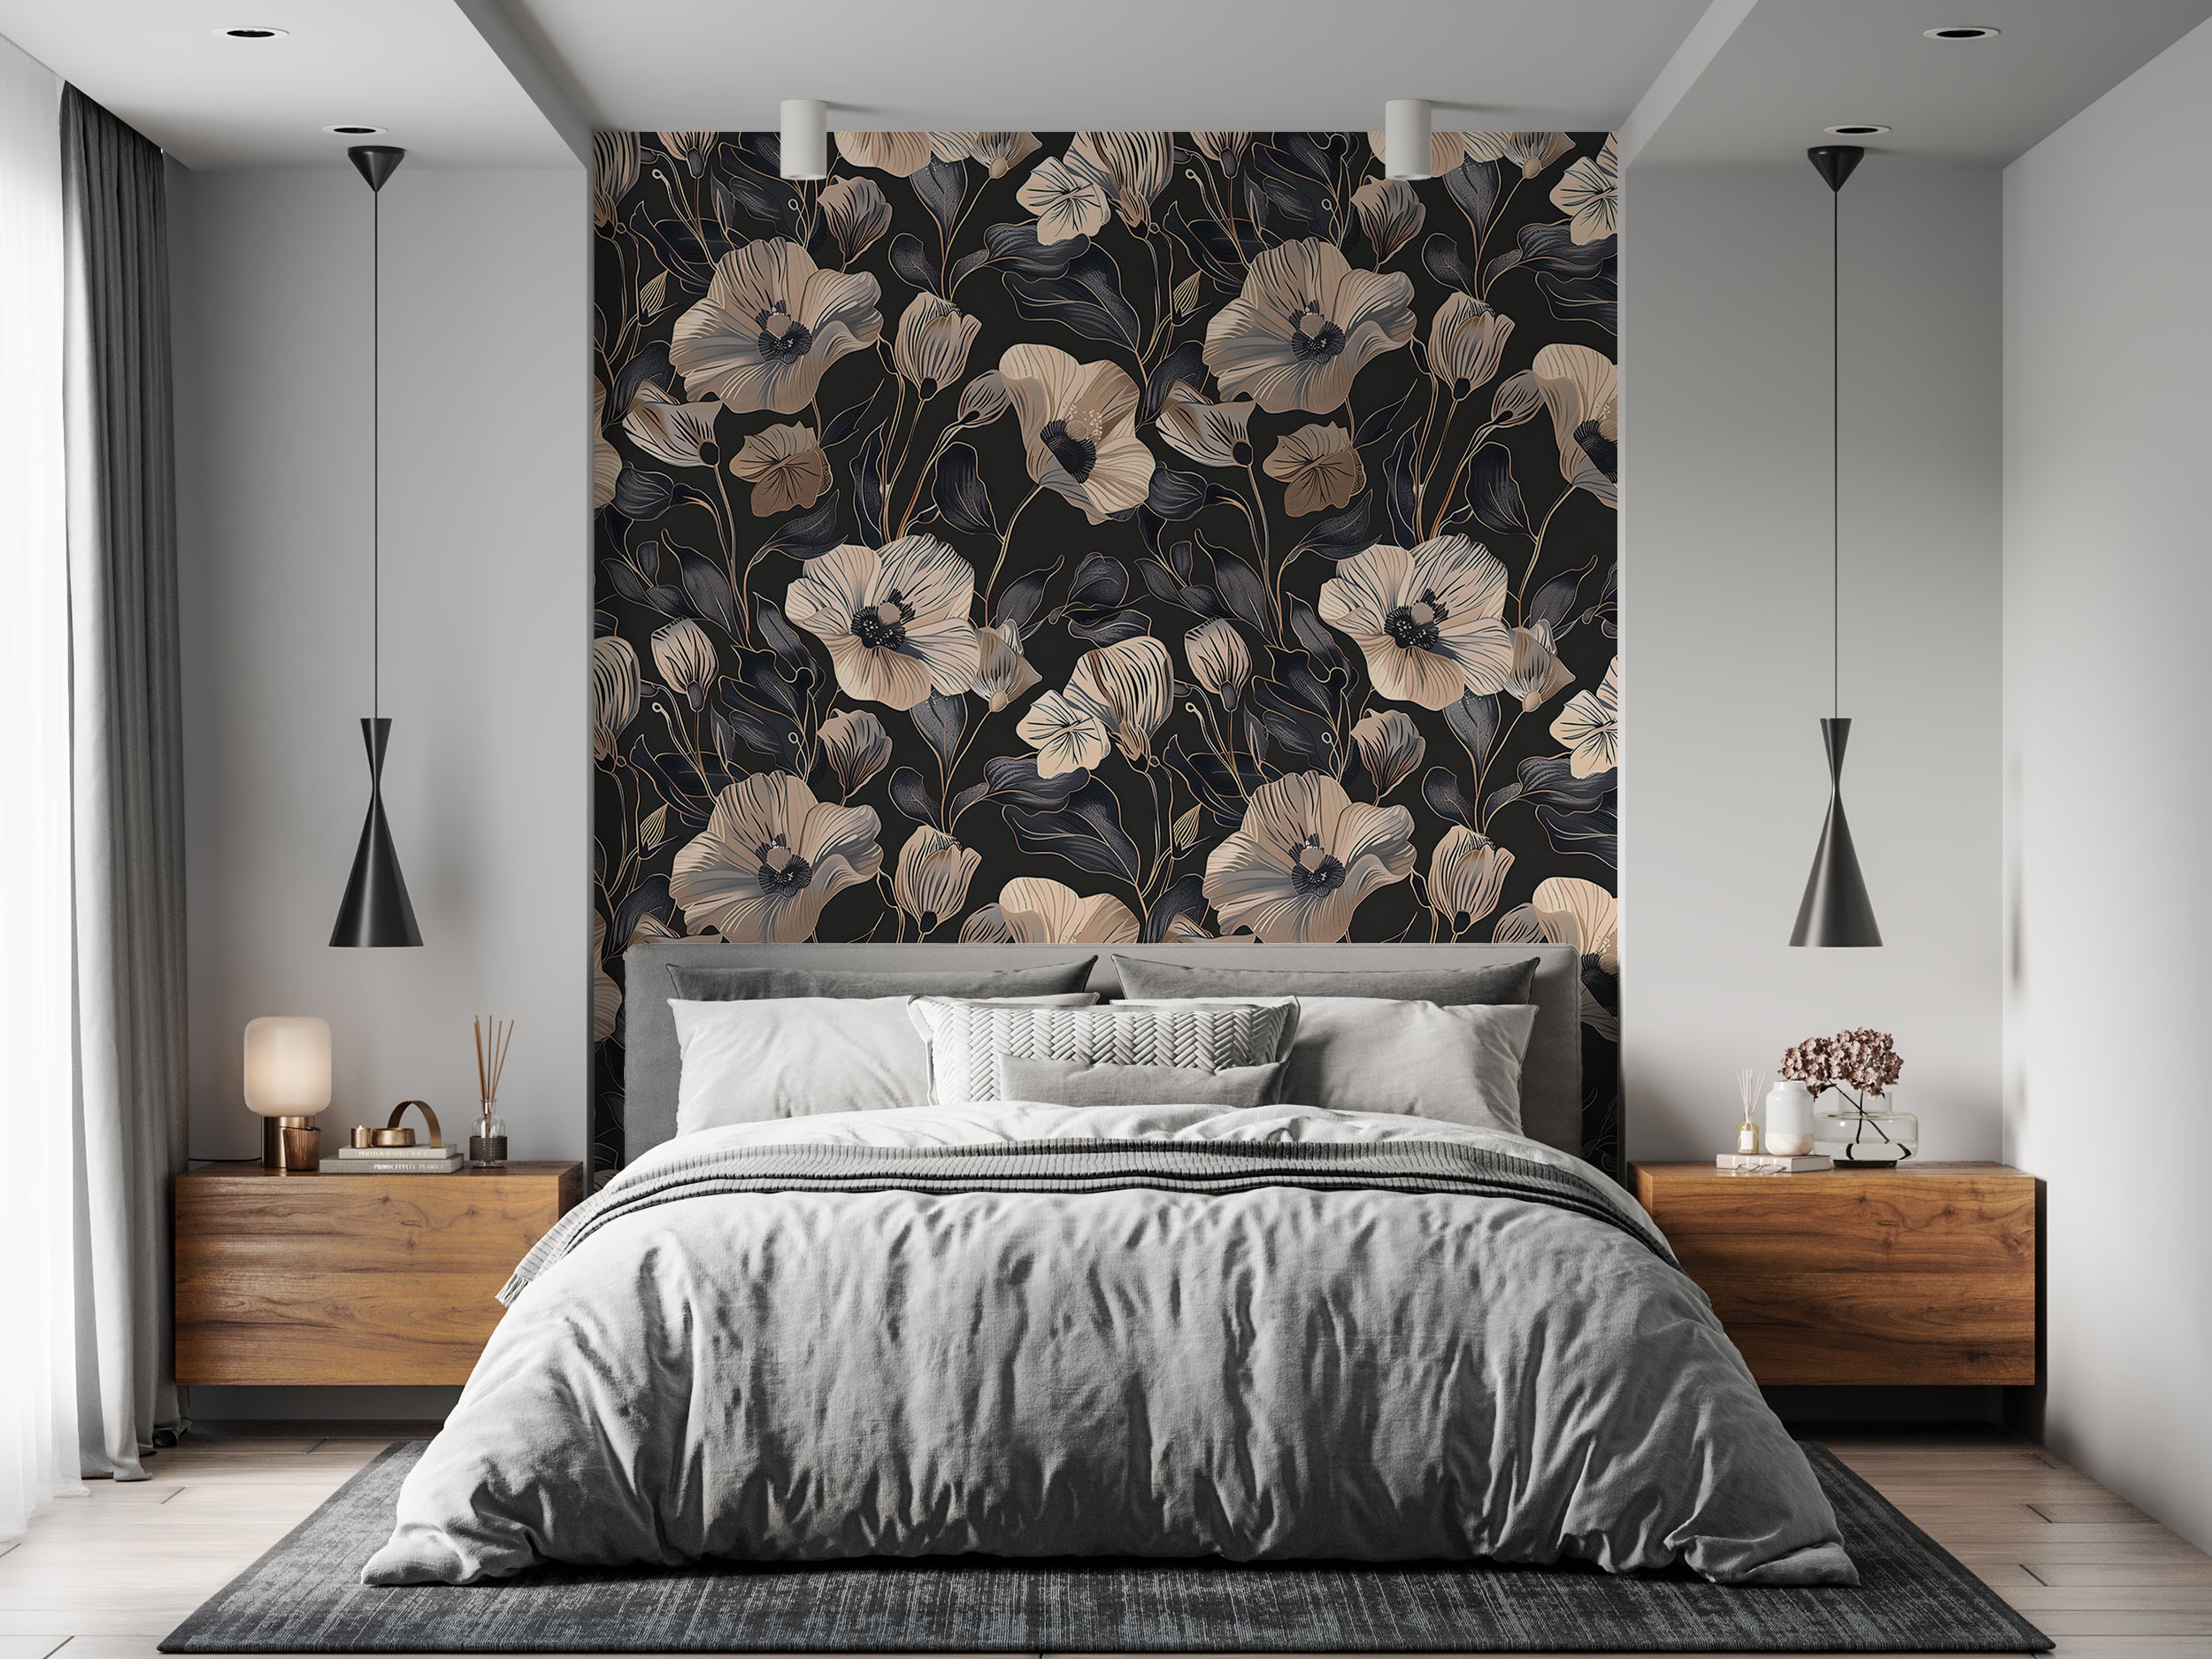 Dusty Rose and Dark Grey Floral Wallpaper, Peel and Stick Poppy Flowers Wall Decal, Removable Dark Botanical Decor, Pink & Black Flowers